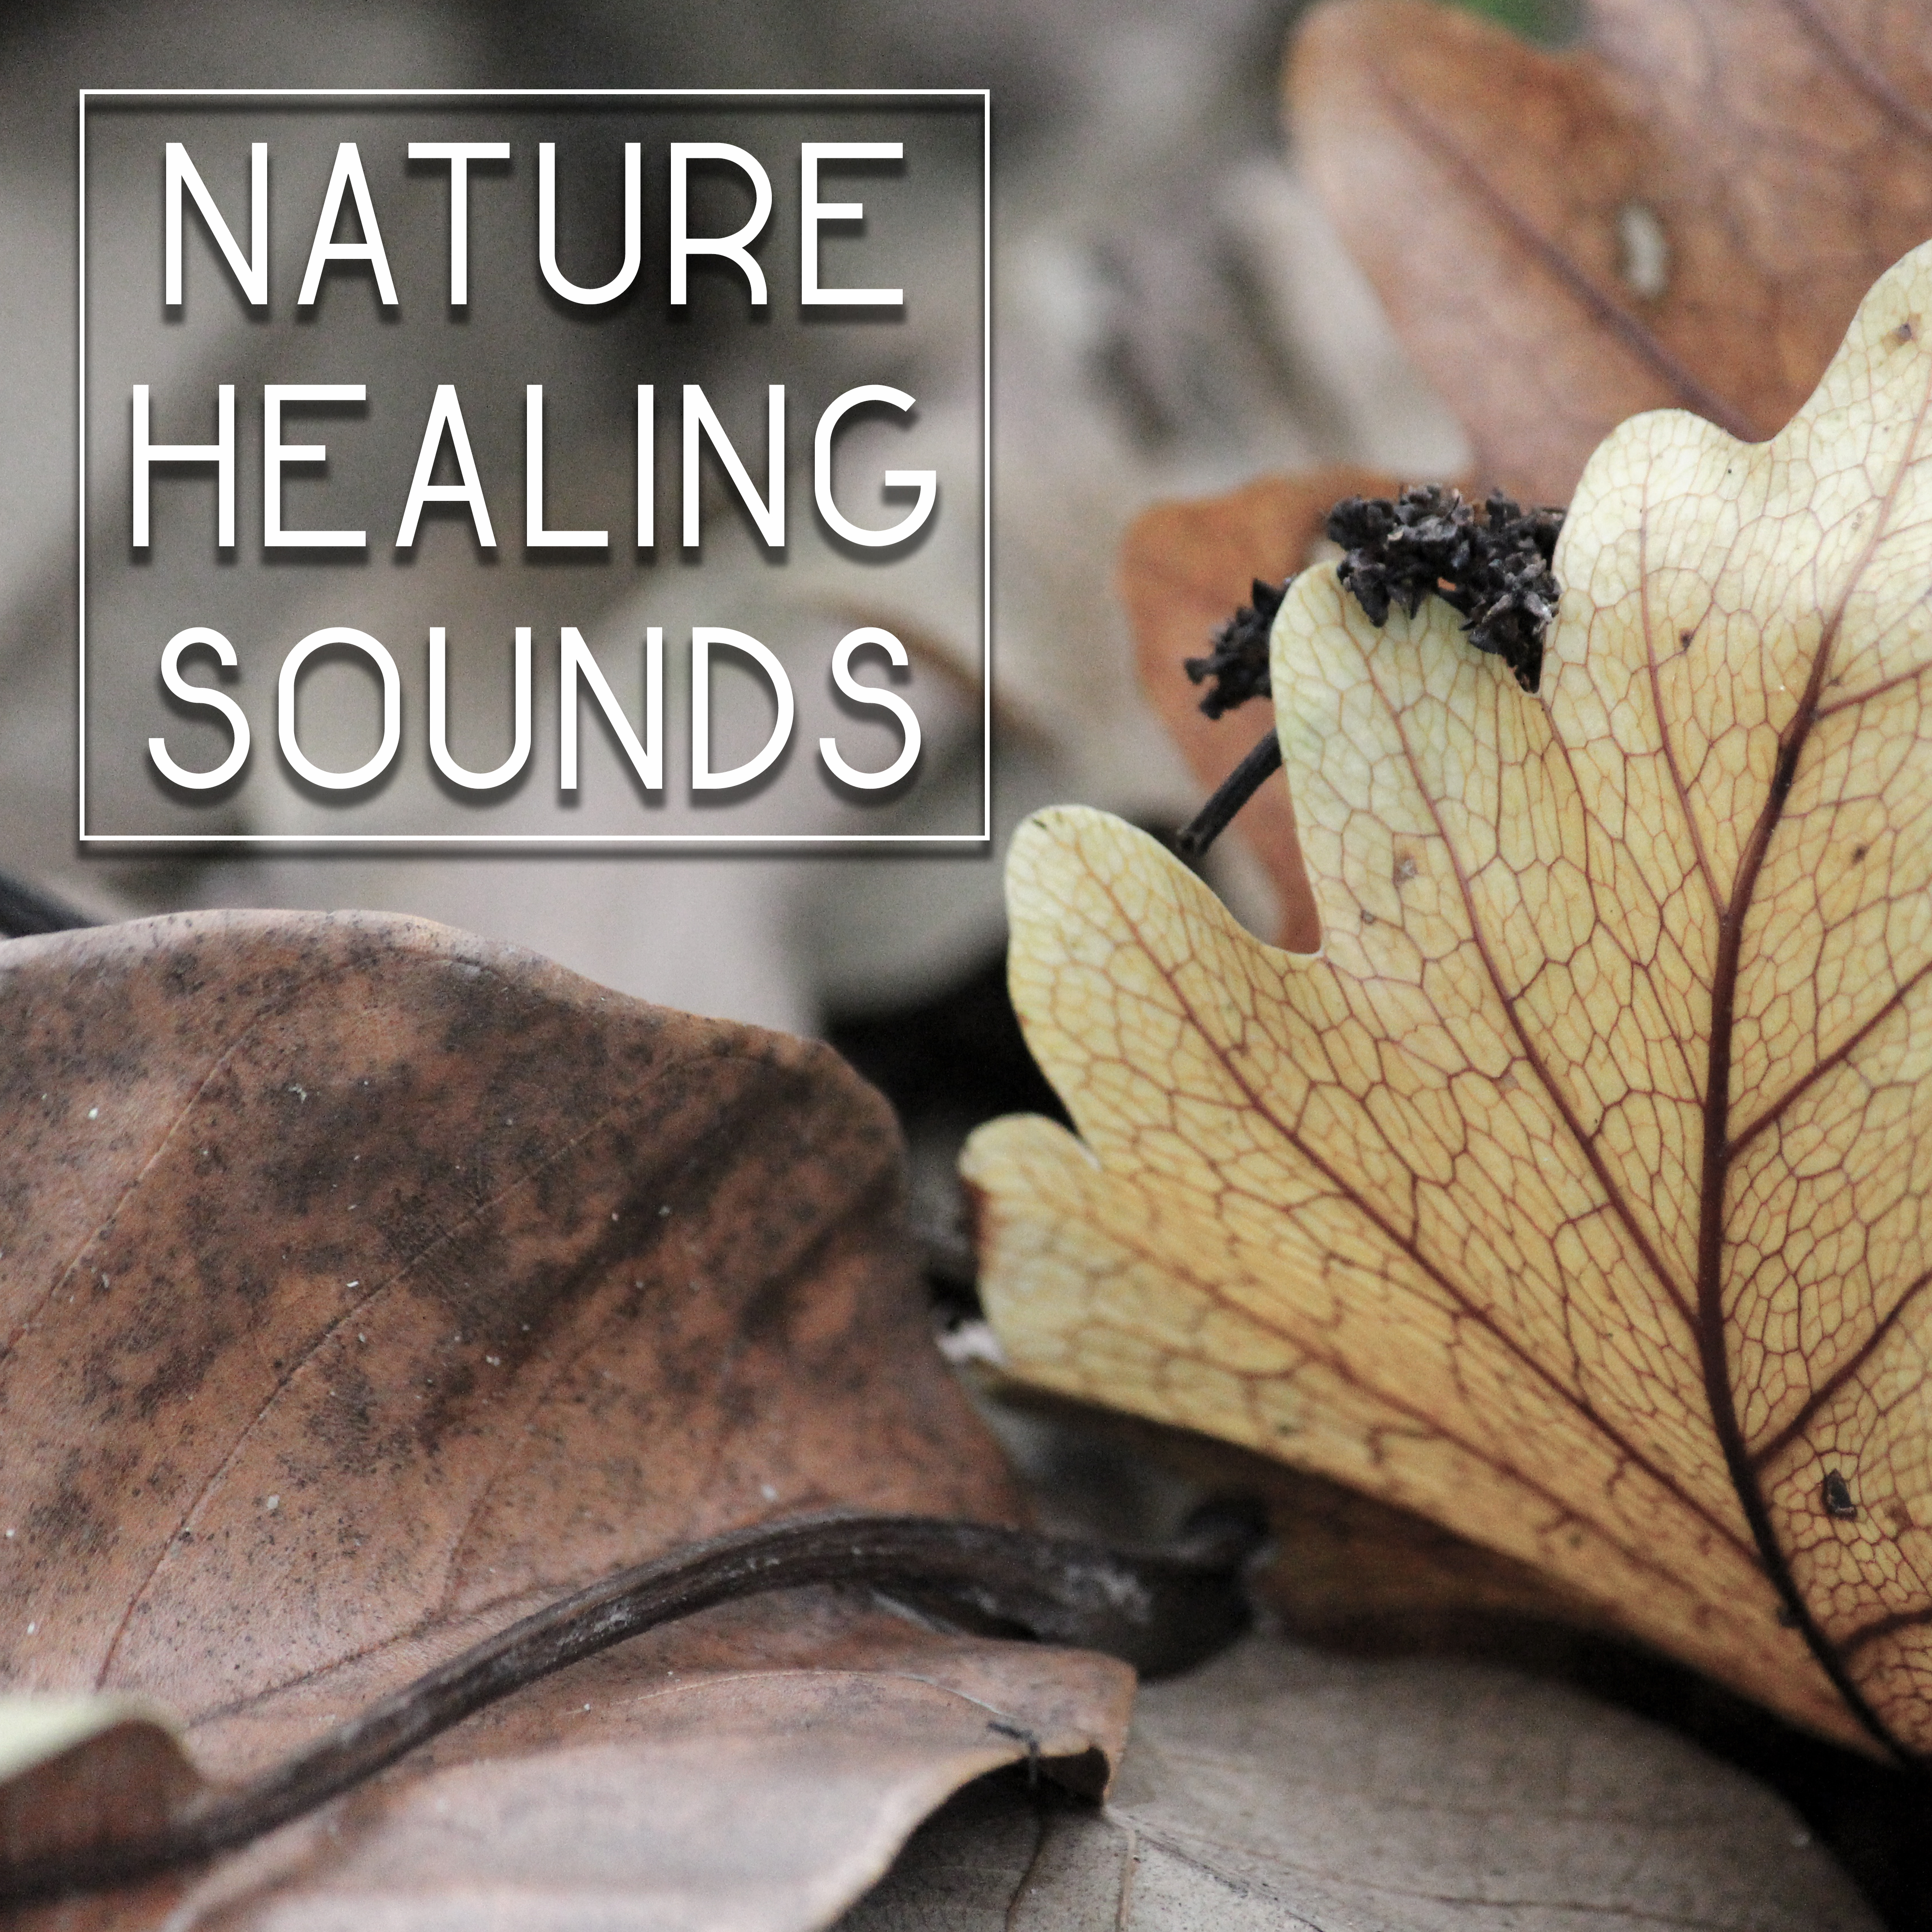 Nature Healing Sounds  Soft Music to Calm Down, Waves of Calmness, Peaceful Sounds, Mind Control